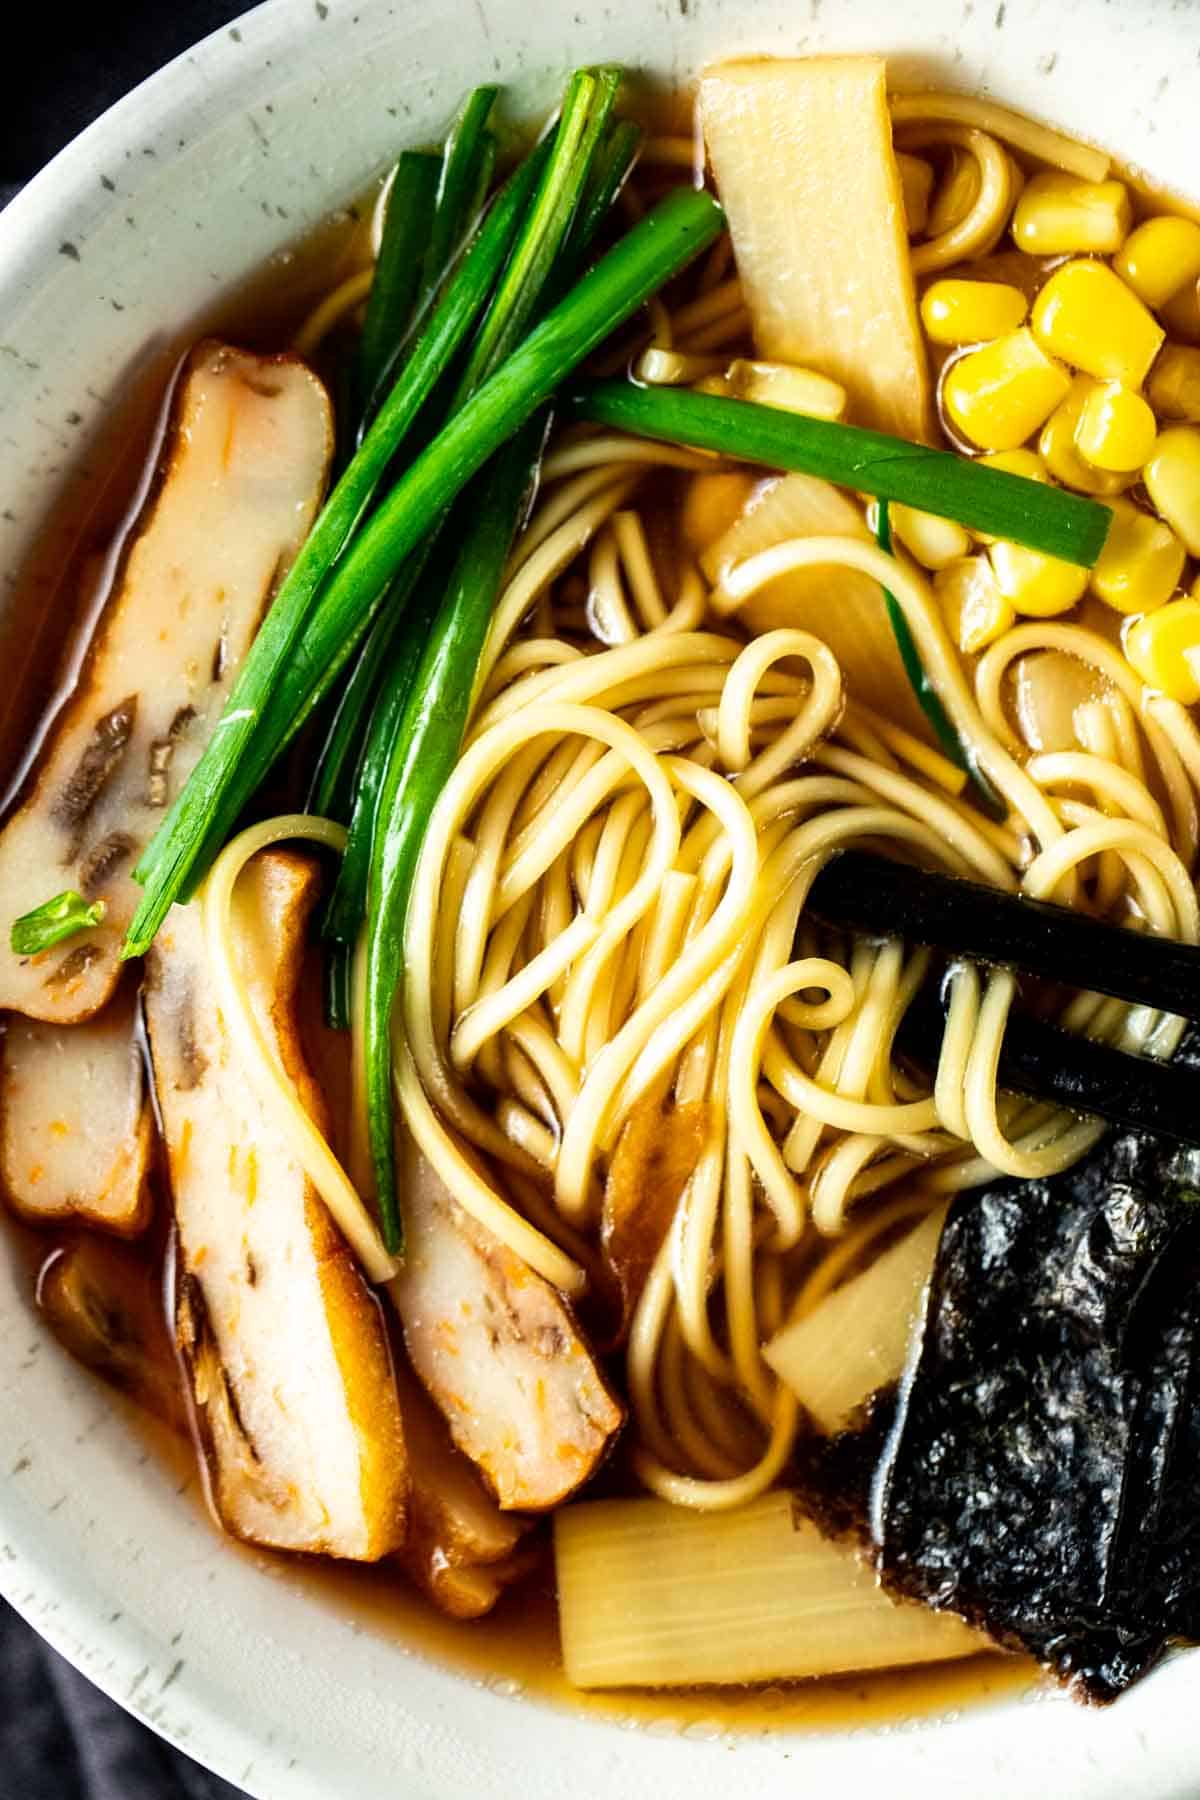 chopsticks with noodles wrapped around in a bowl of broth and vegetables